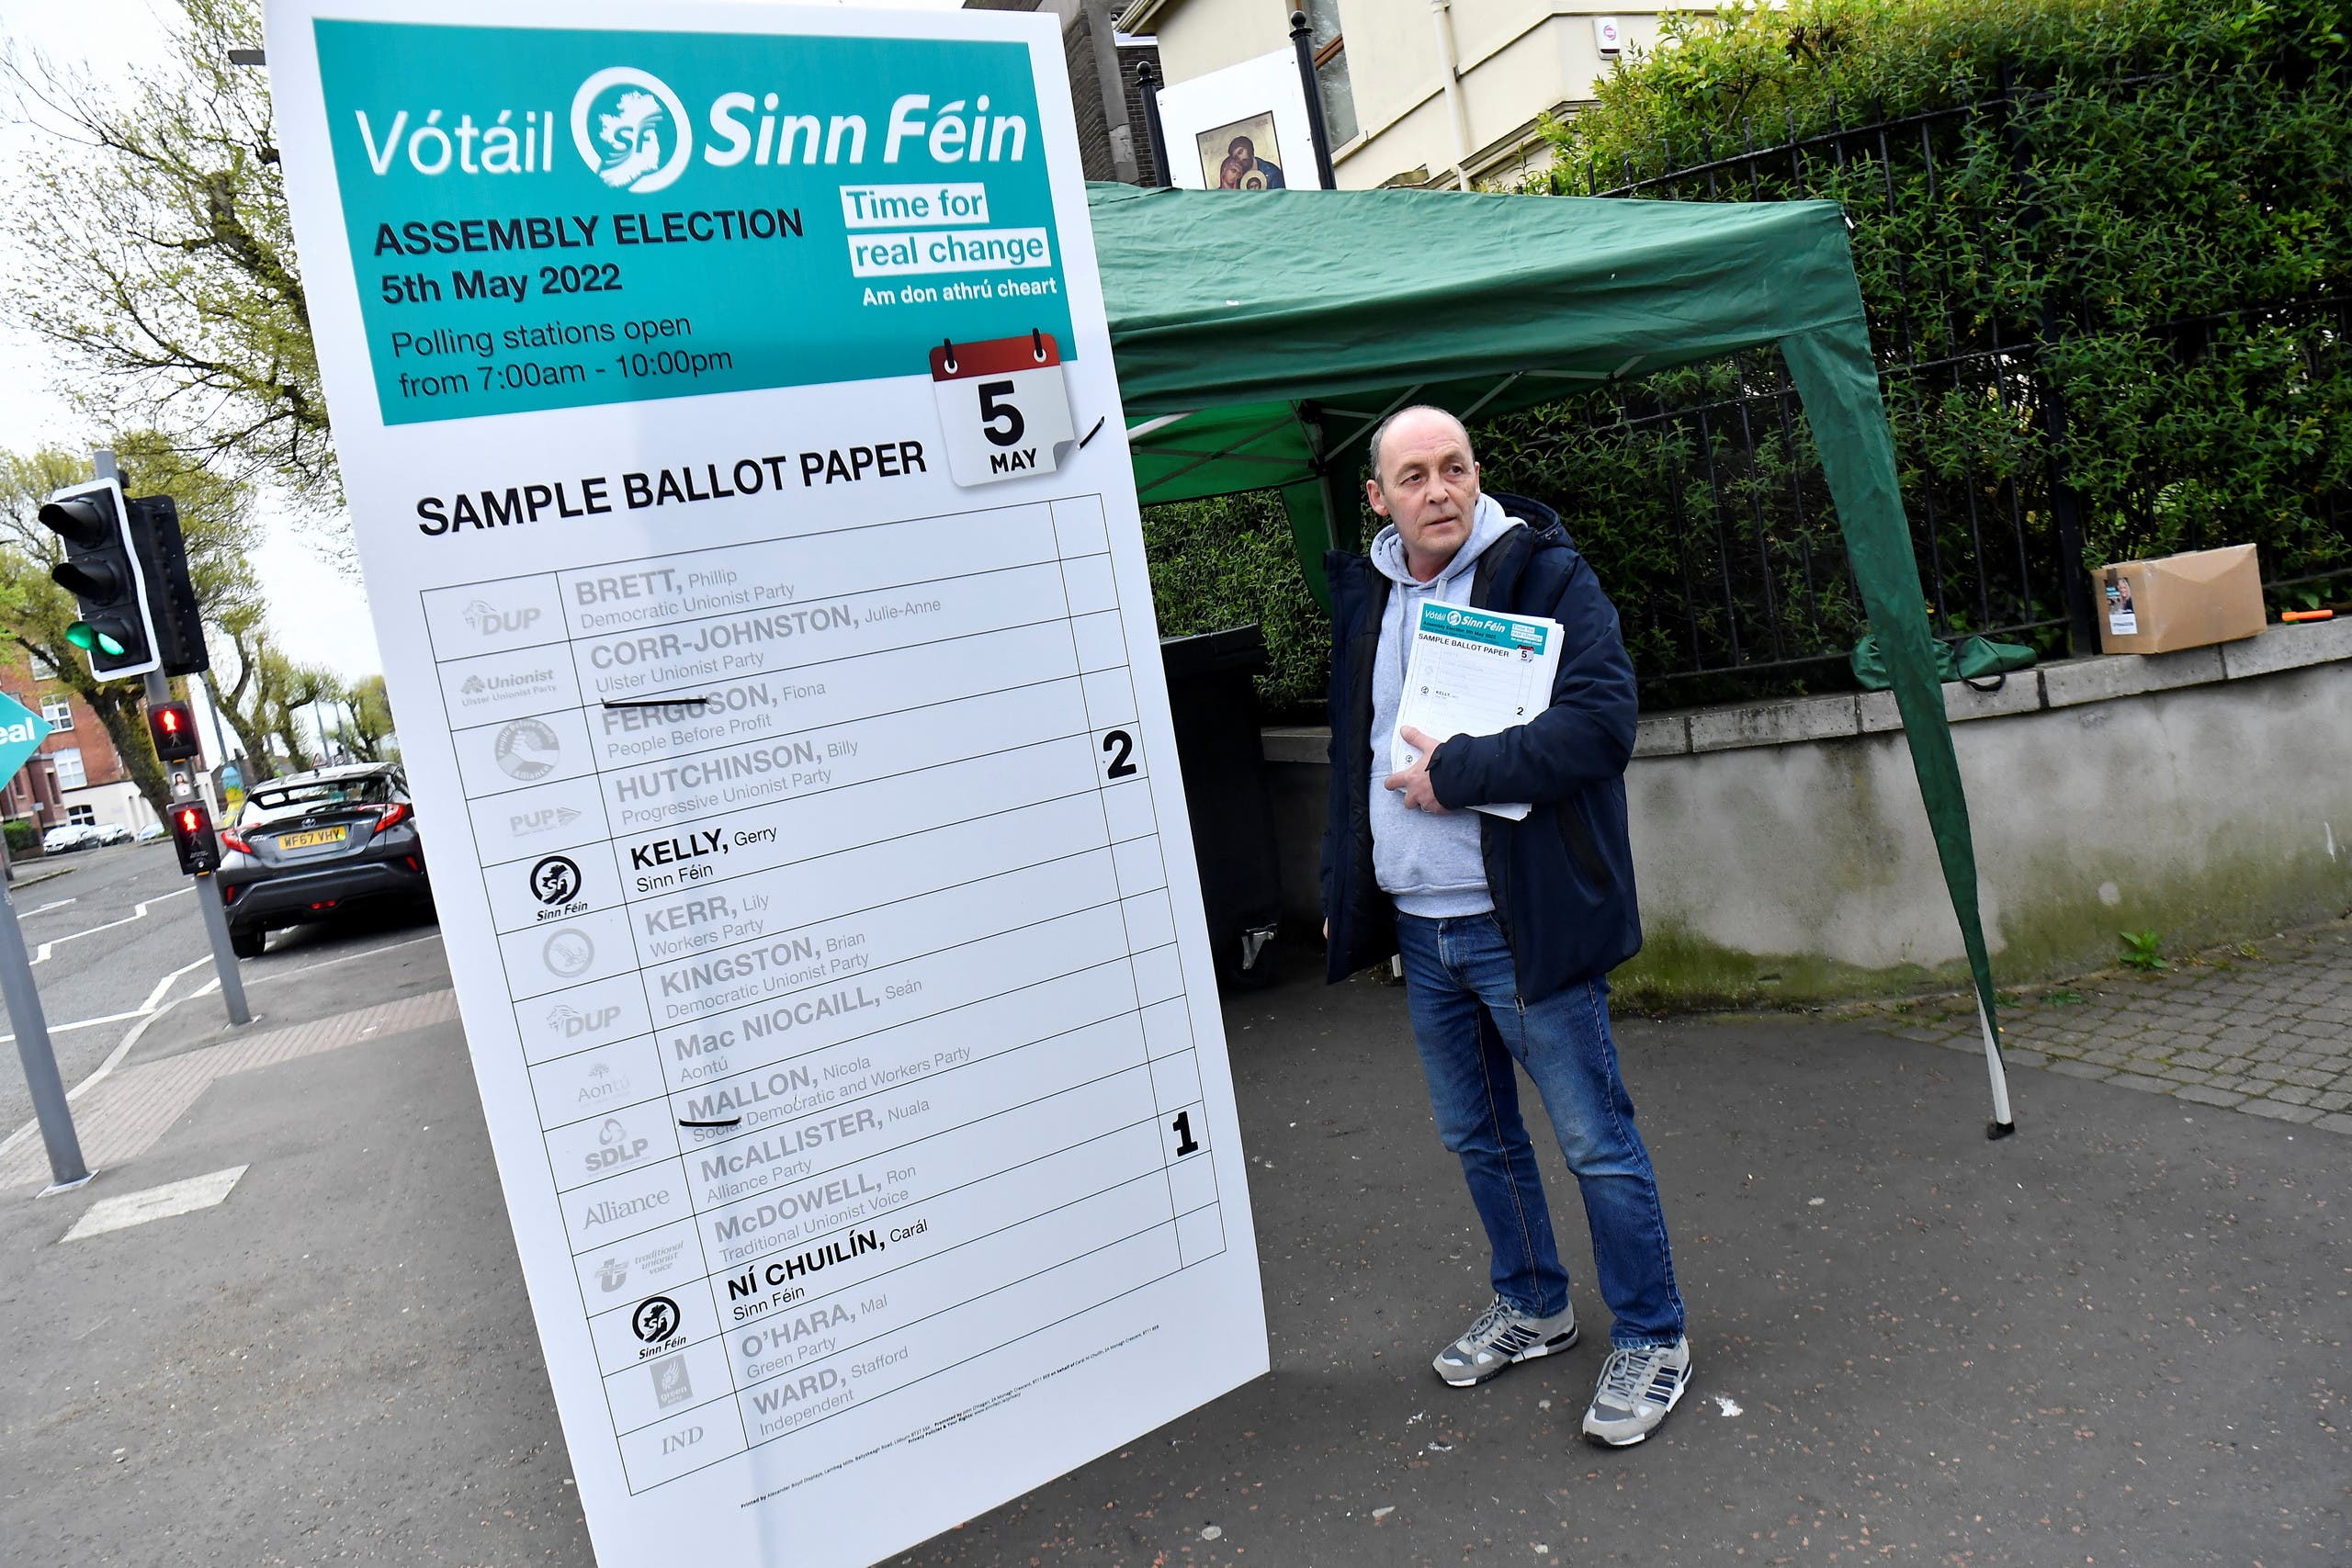 Banner for party "shin fen" In front of a polling station in Belfast